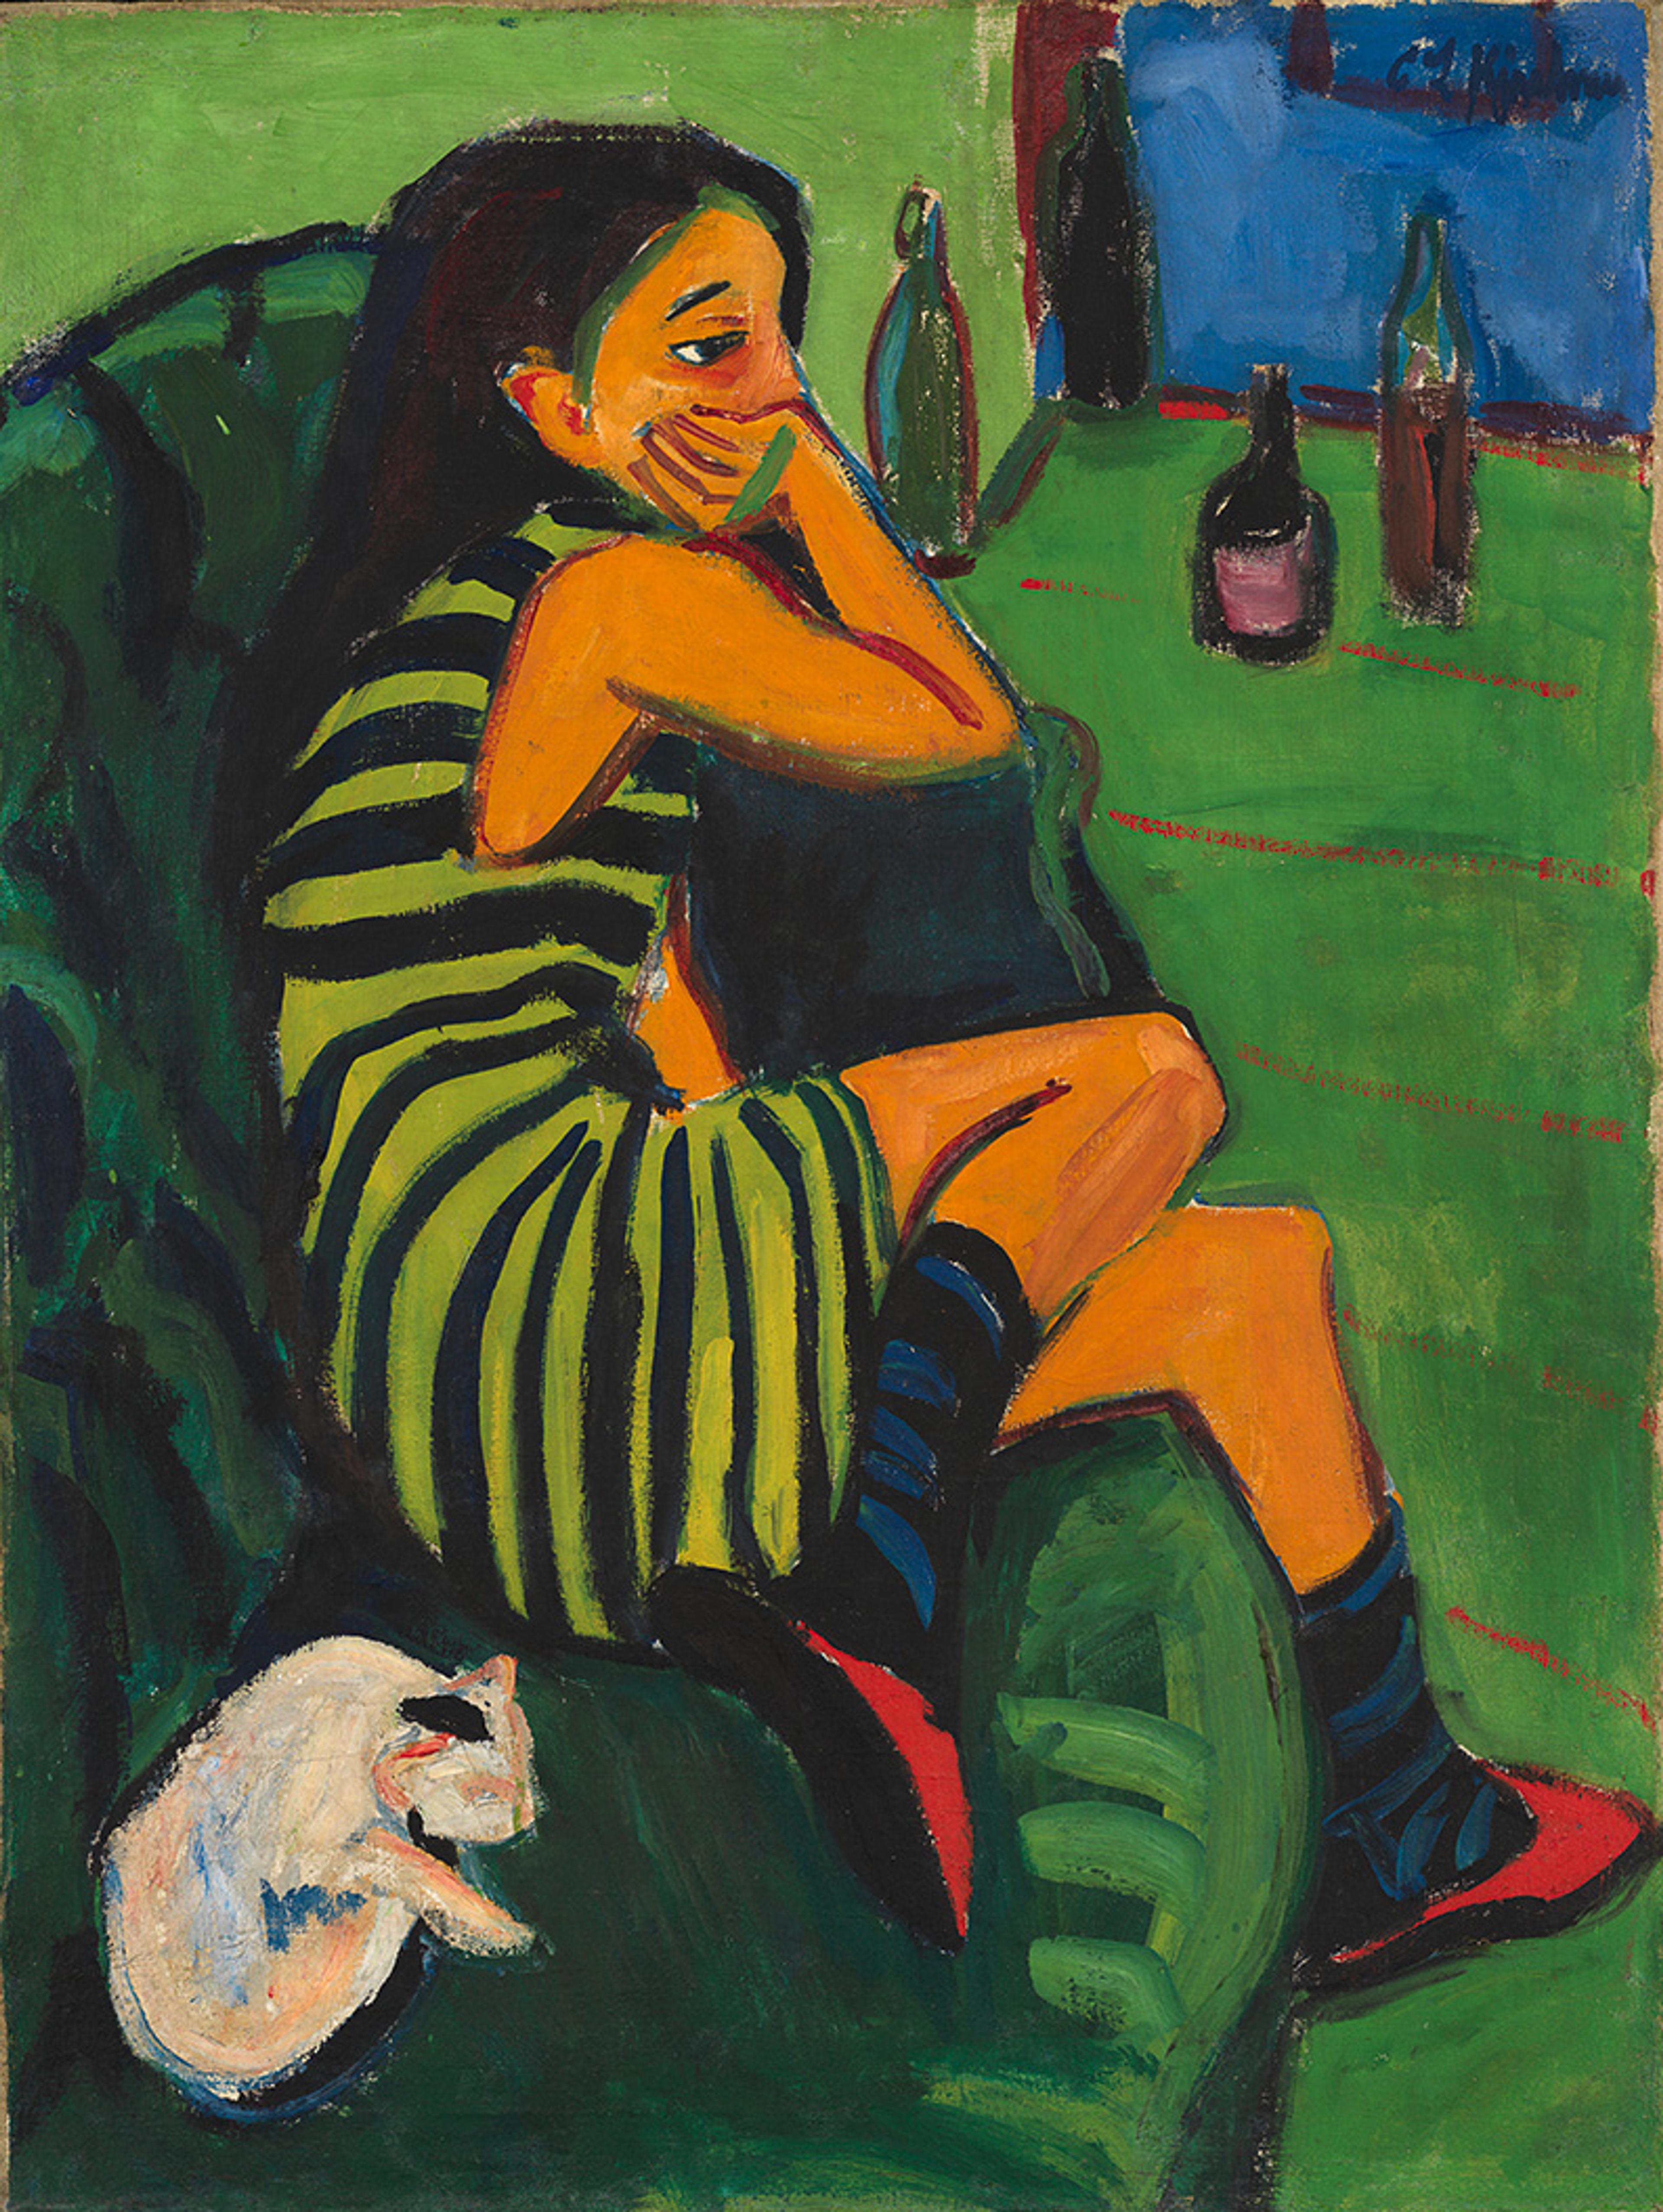 Painting of a person in a striped dress sitting on a green sofa with a hand on their face, and a white cat lying beside them.